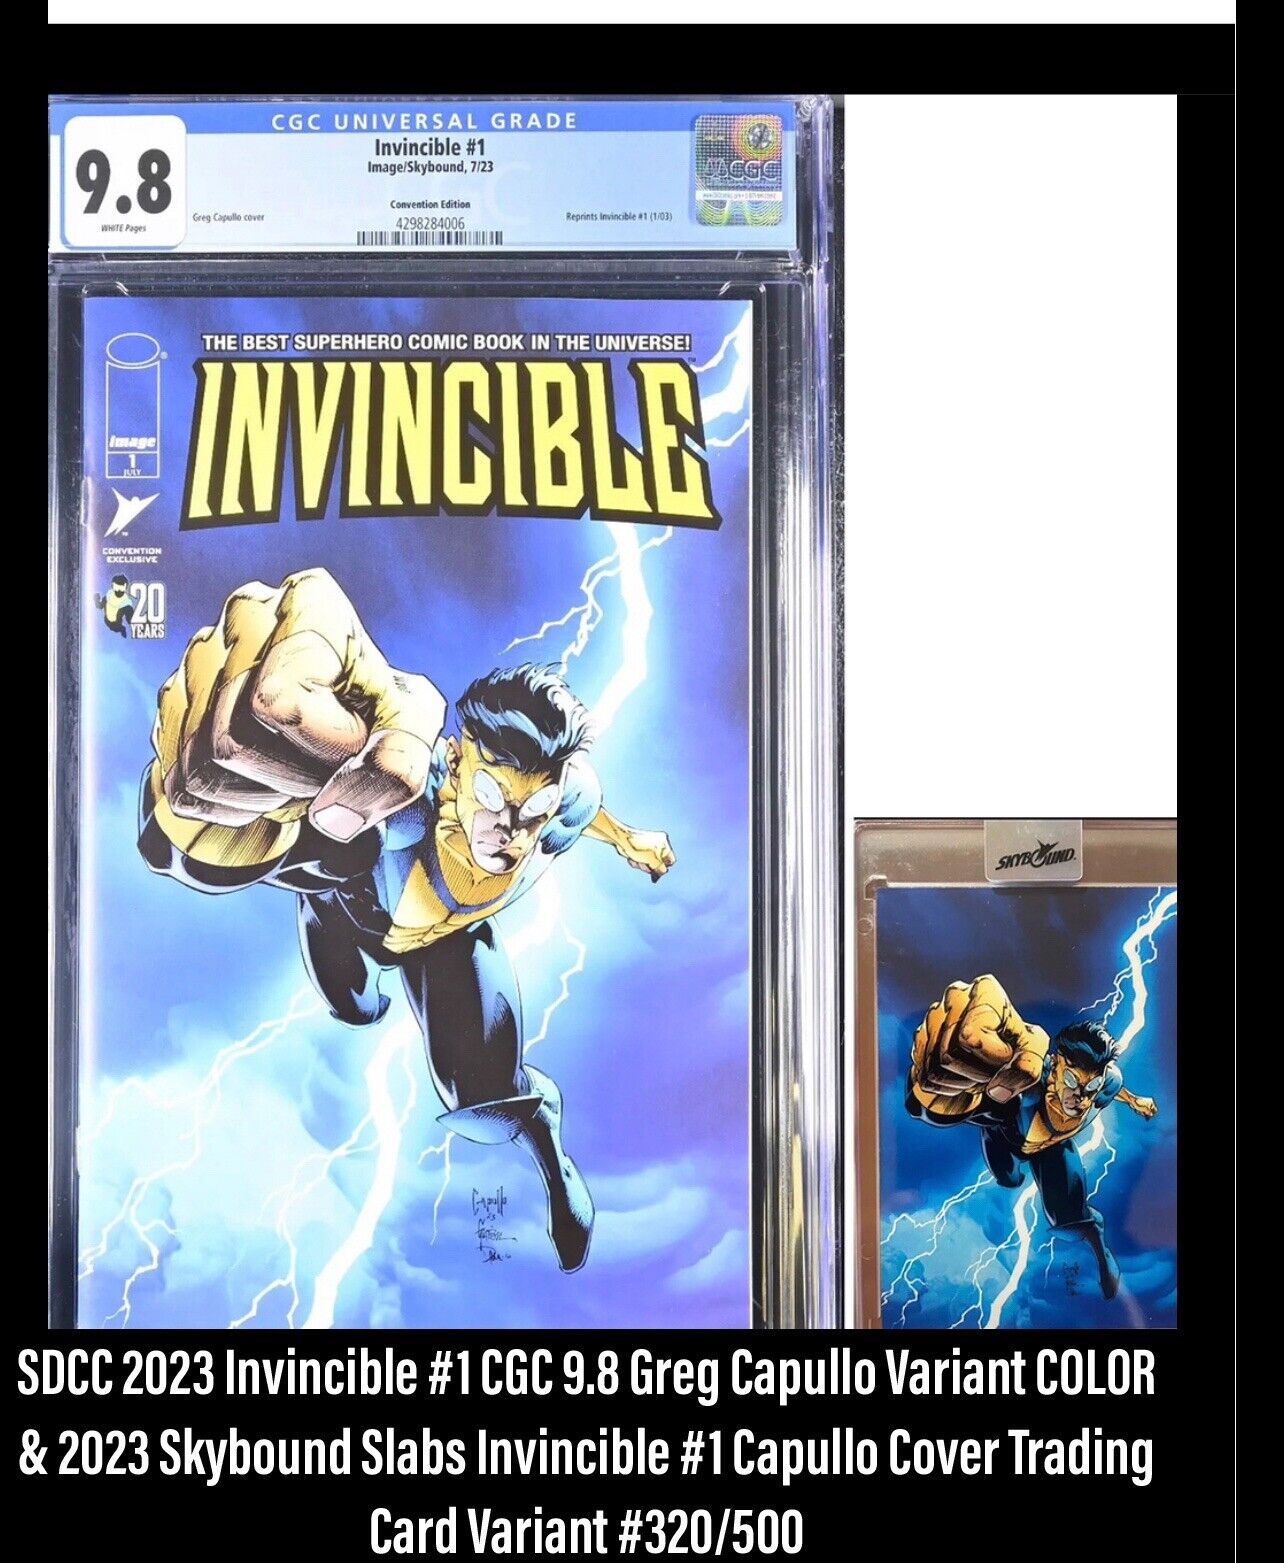 Invincible #1 CGC 9.8 & Invincible 1 Slabbed Card Skybound 320/500 Sold Out SDCC